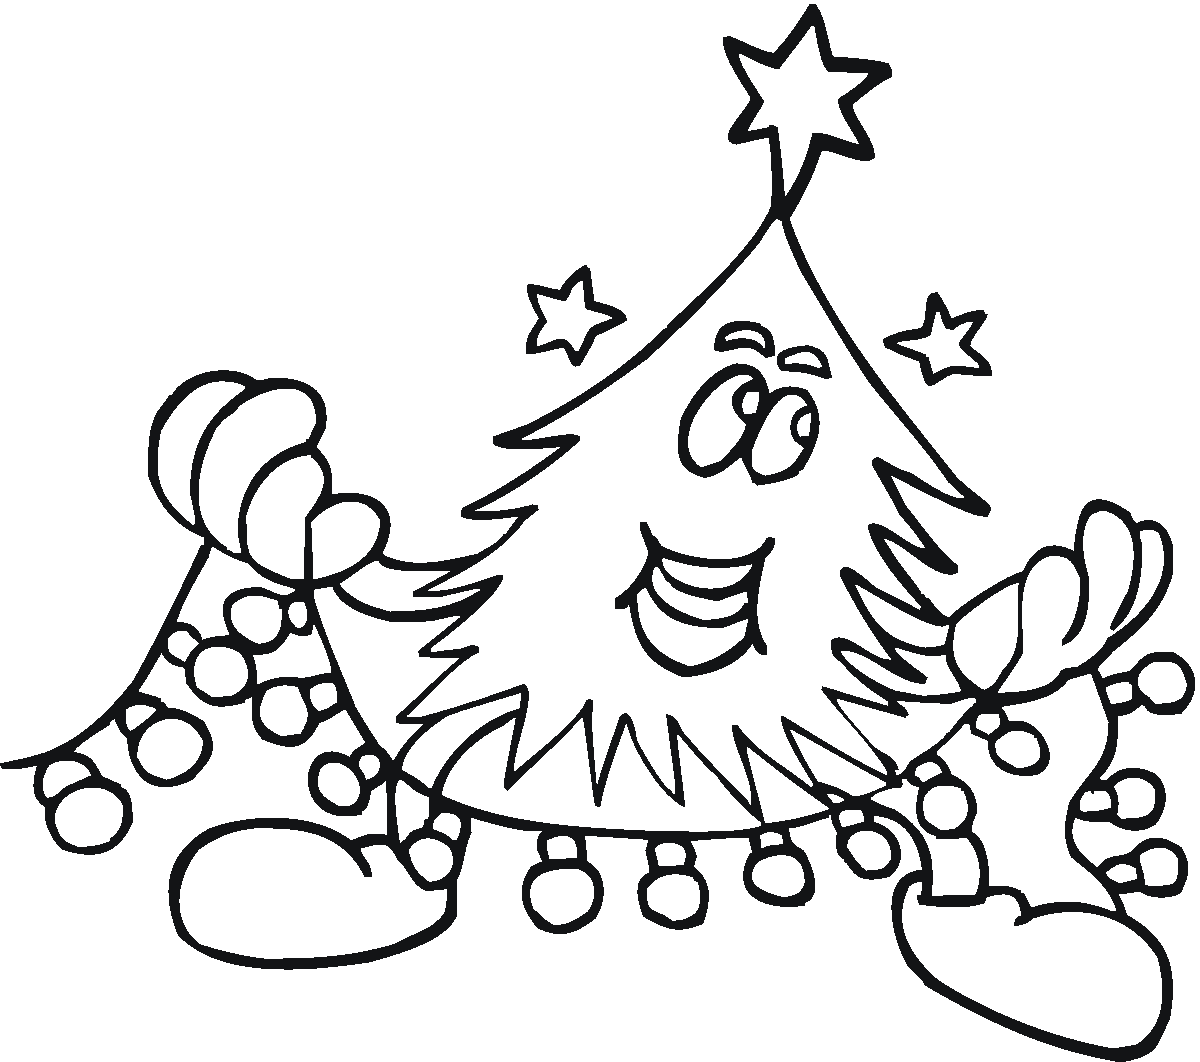 colouring pages of christmas tree printable christmas tree coloring pages for kids cool2bkids pages tree christmas colouring of 